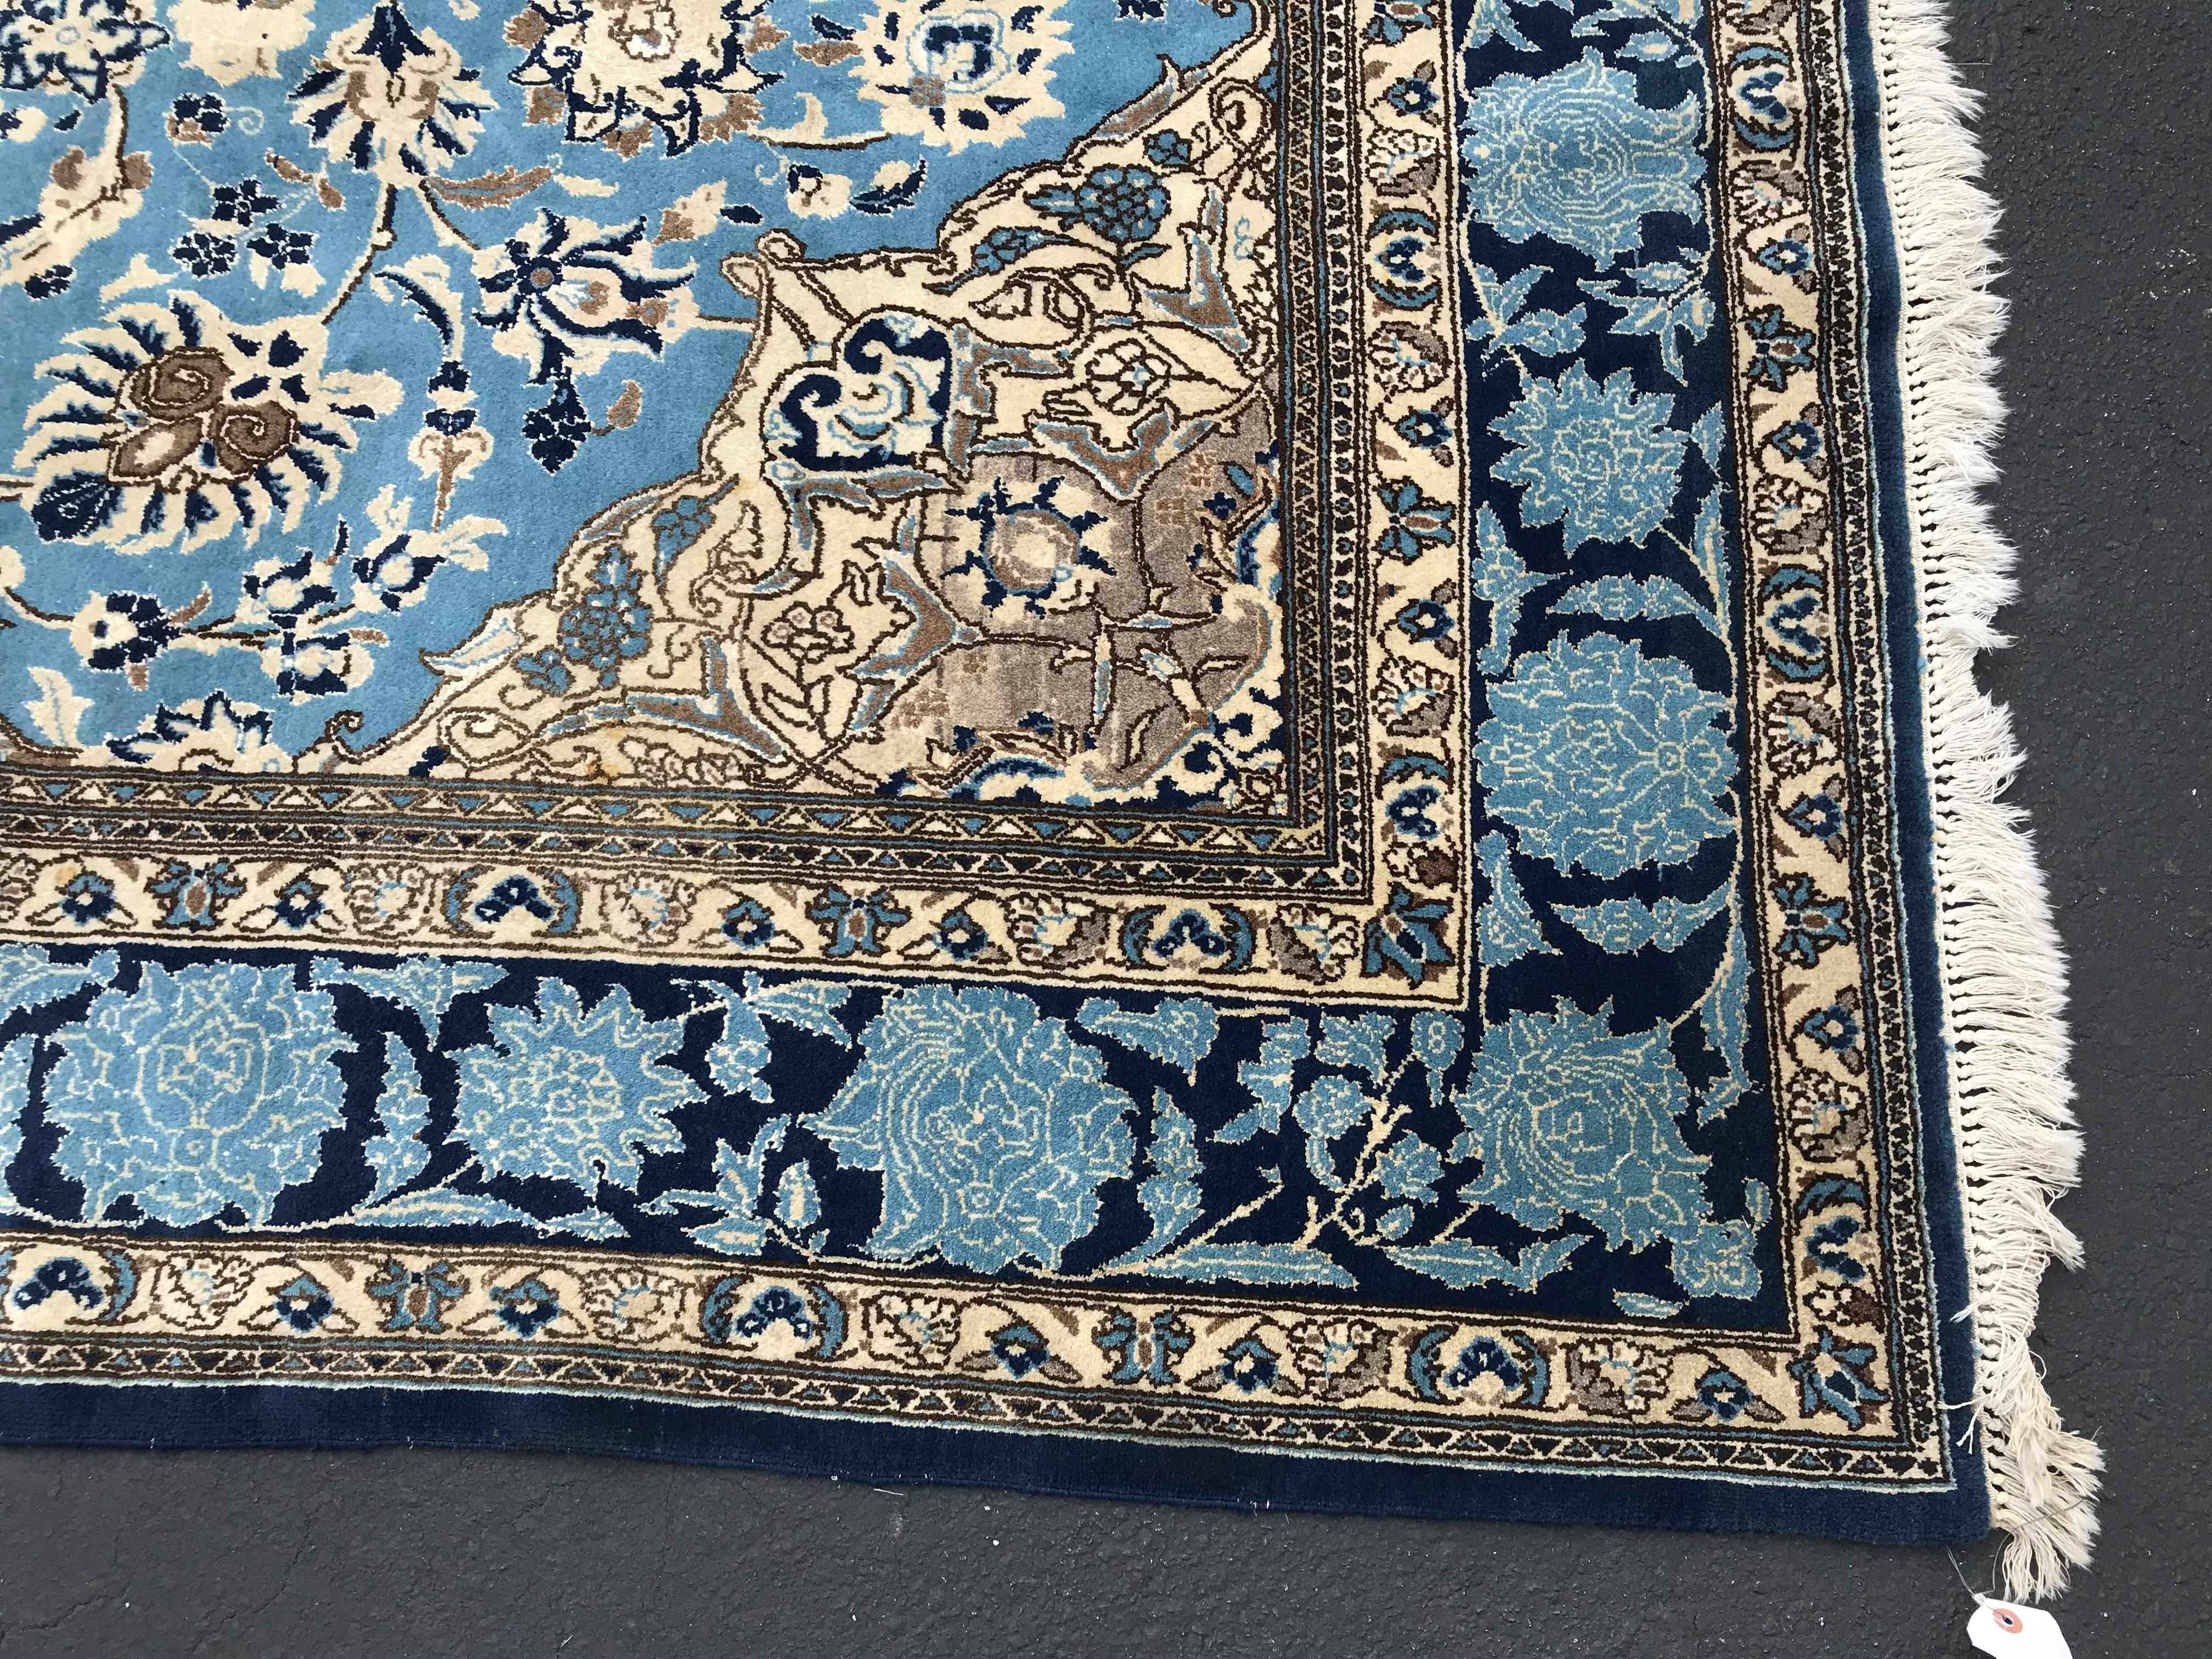 Hand-Woven Persian Blue Room Size Rug with Central Medallion, circa 1930s